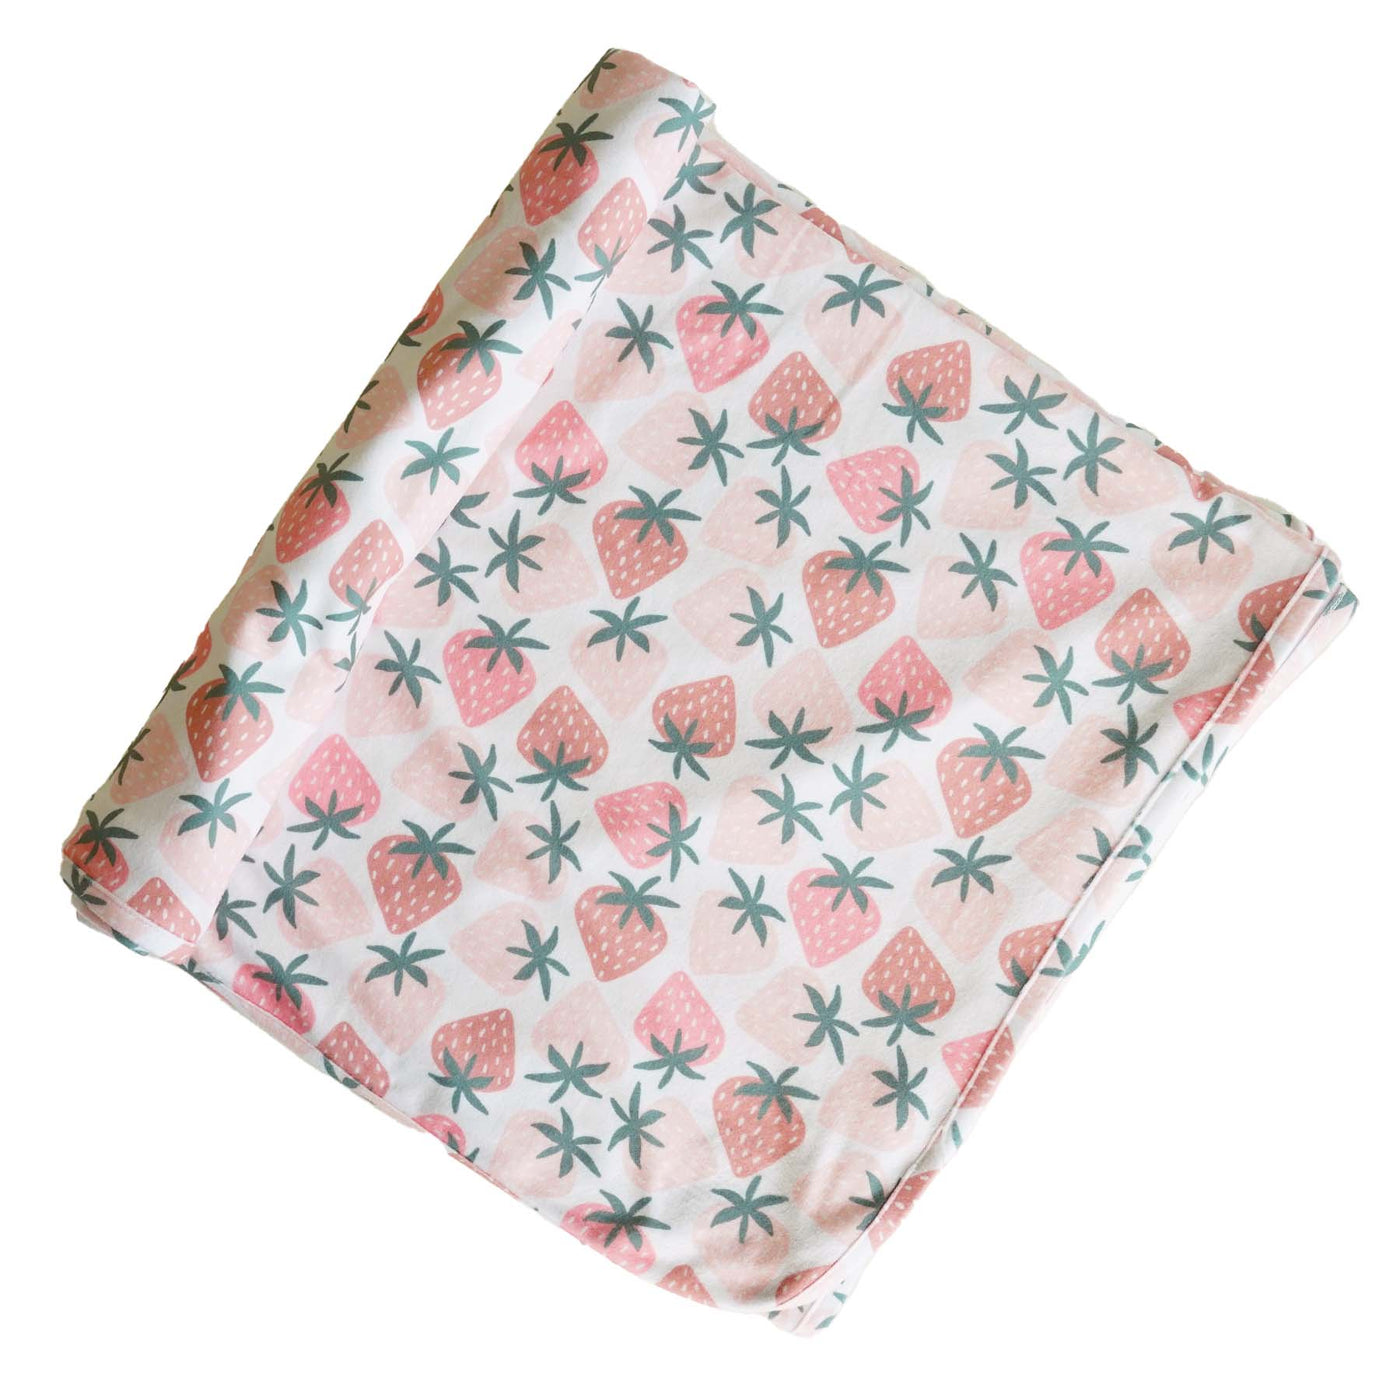 strawberry printed swaddle blanket